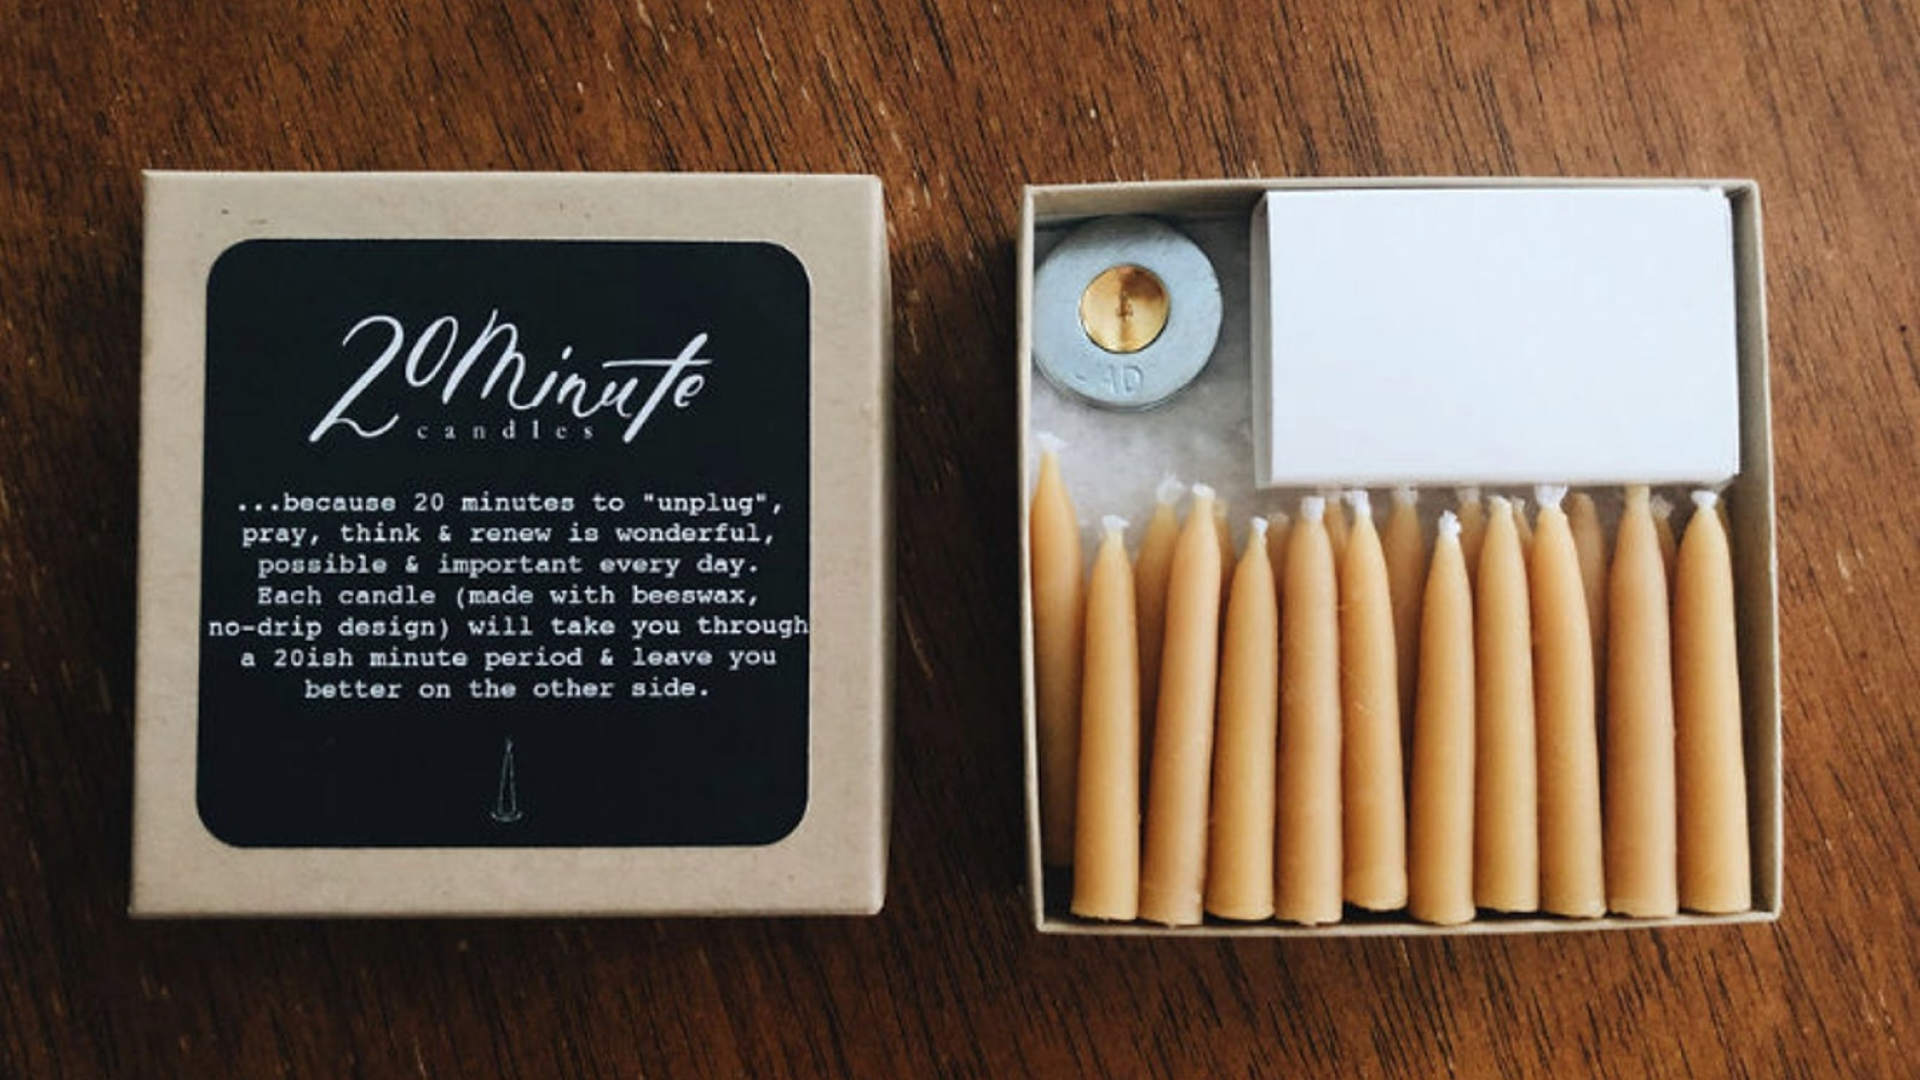 Mini candles that’ll burn for 20 minutes so you can unplug…